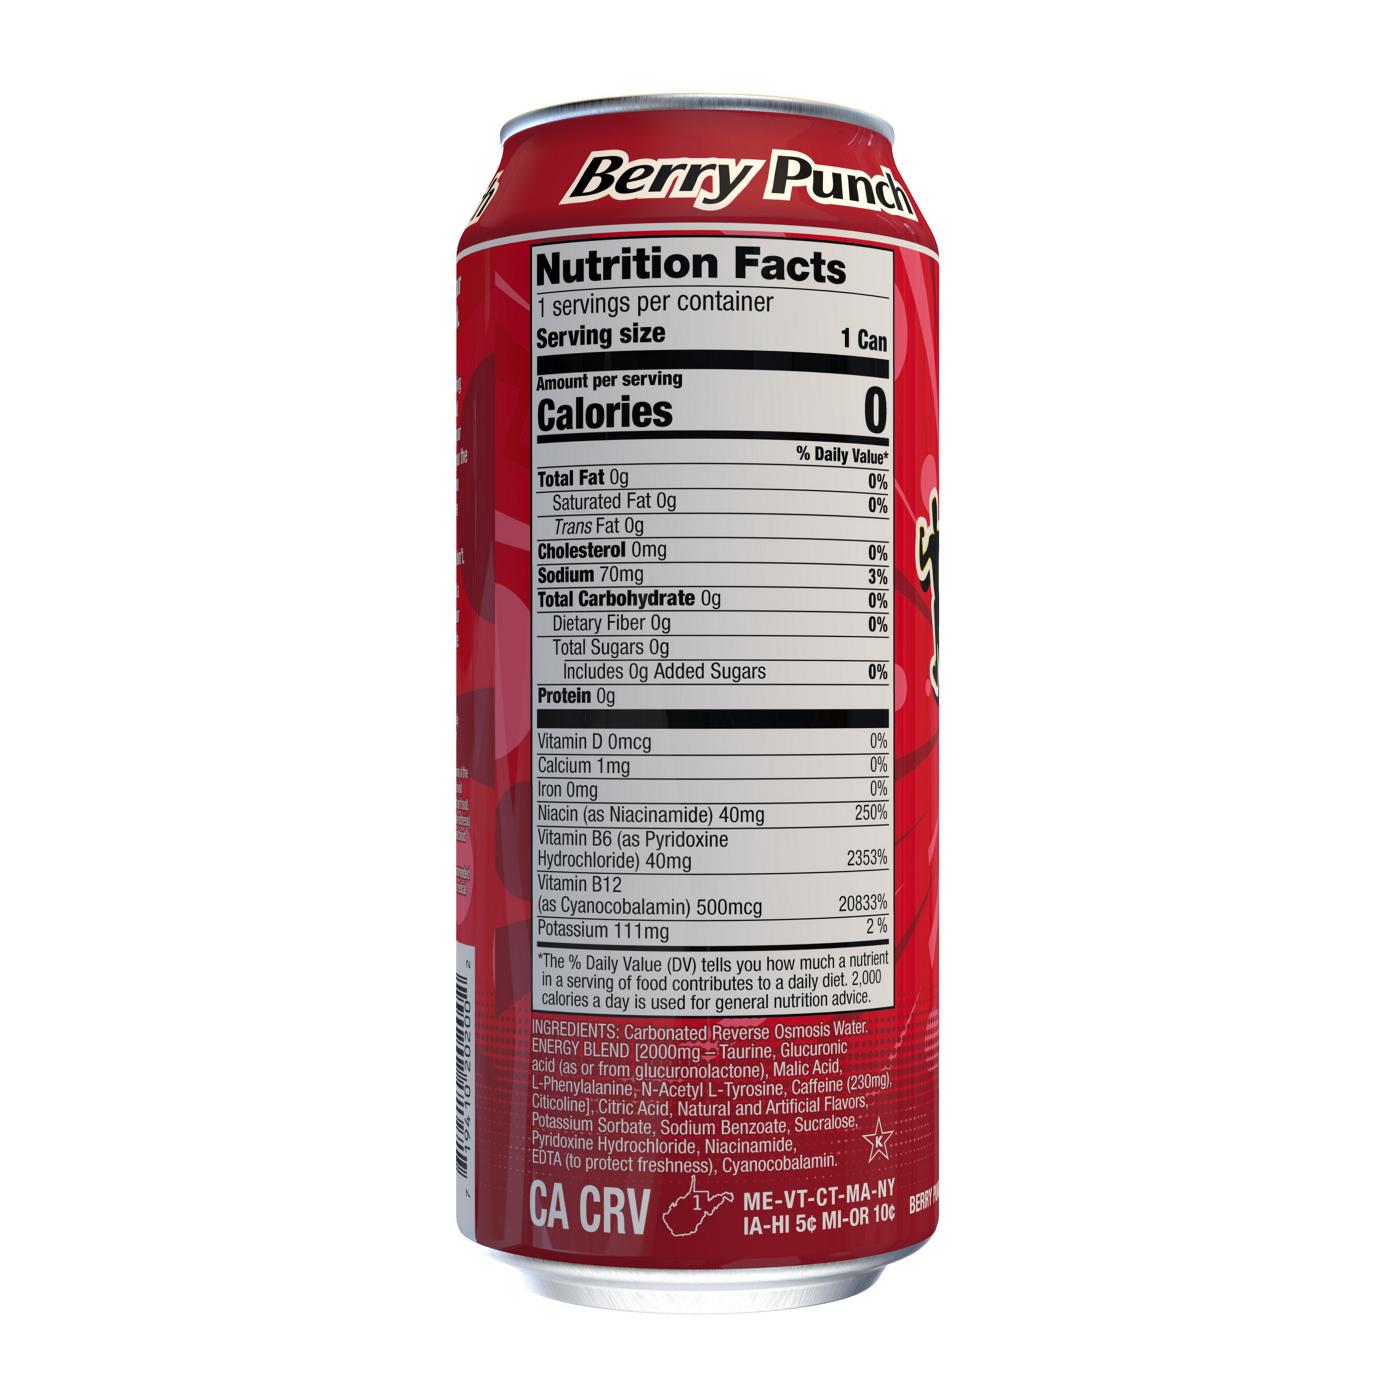 5-hour ENERGY Drink - Berry Punch; image 3 of 3